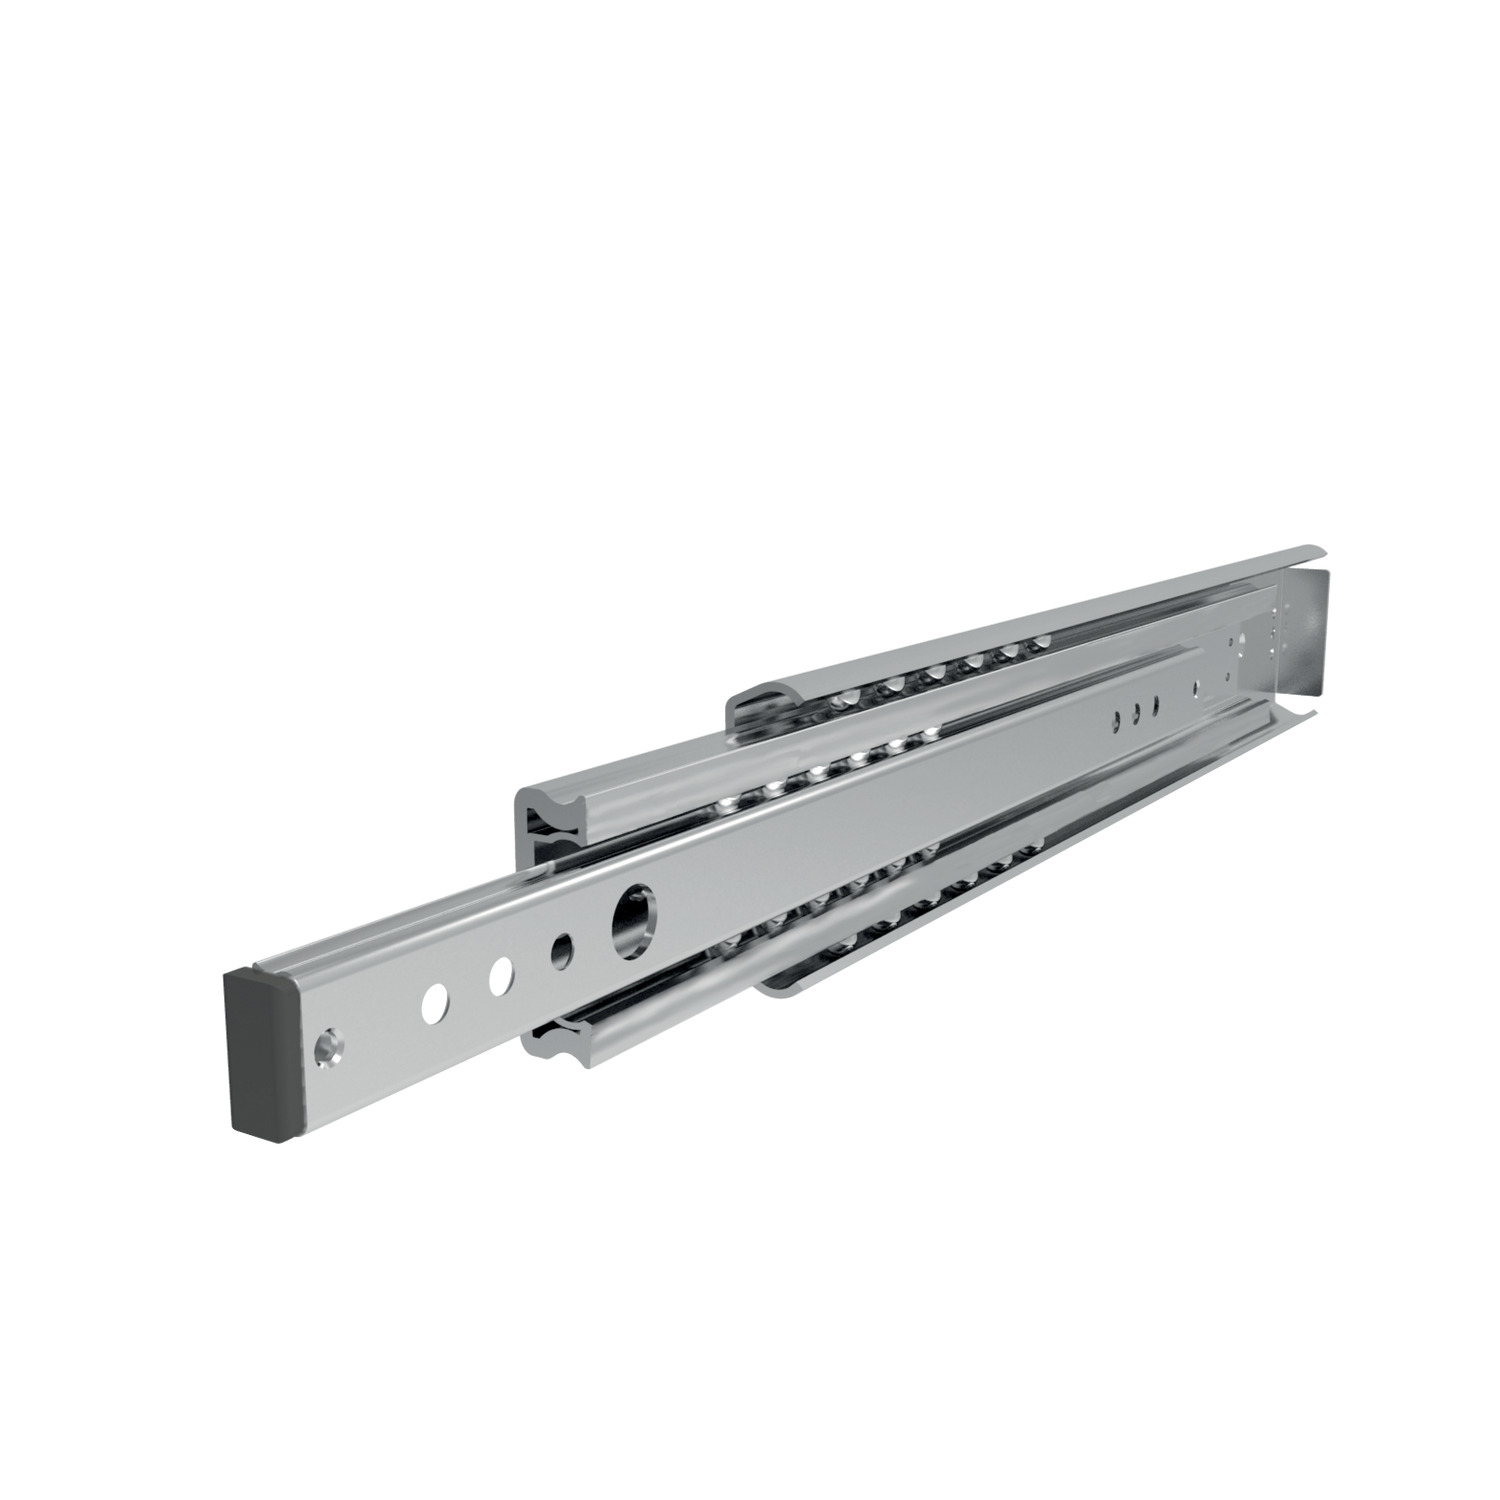 Fully Telescopic Drawer Slide Fully Telescopic drawer slides, loads up to 65kg per pair. Made from galvanised steel.